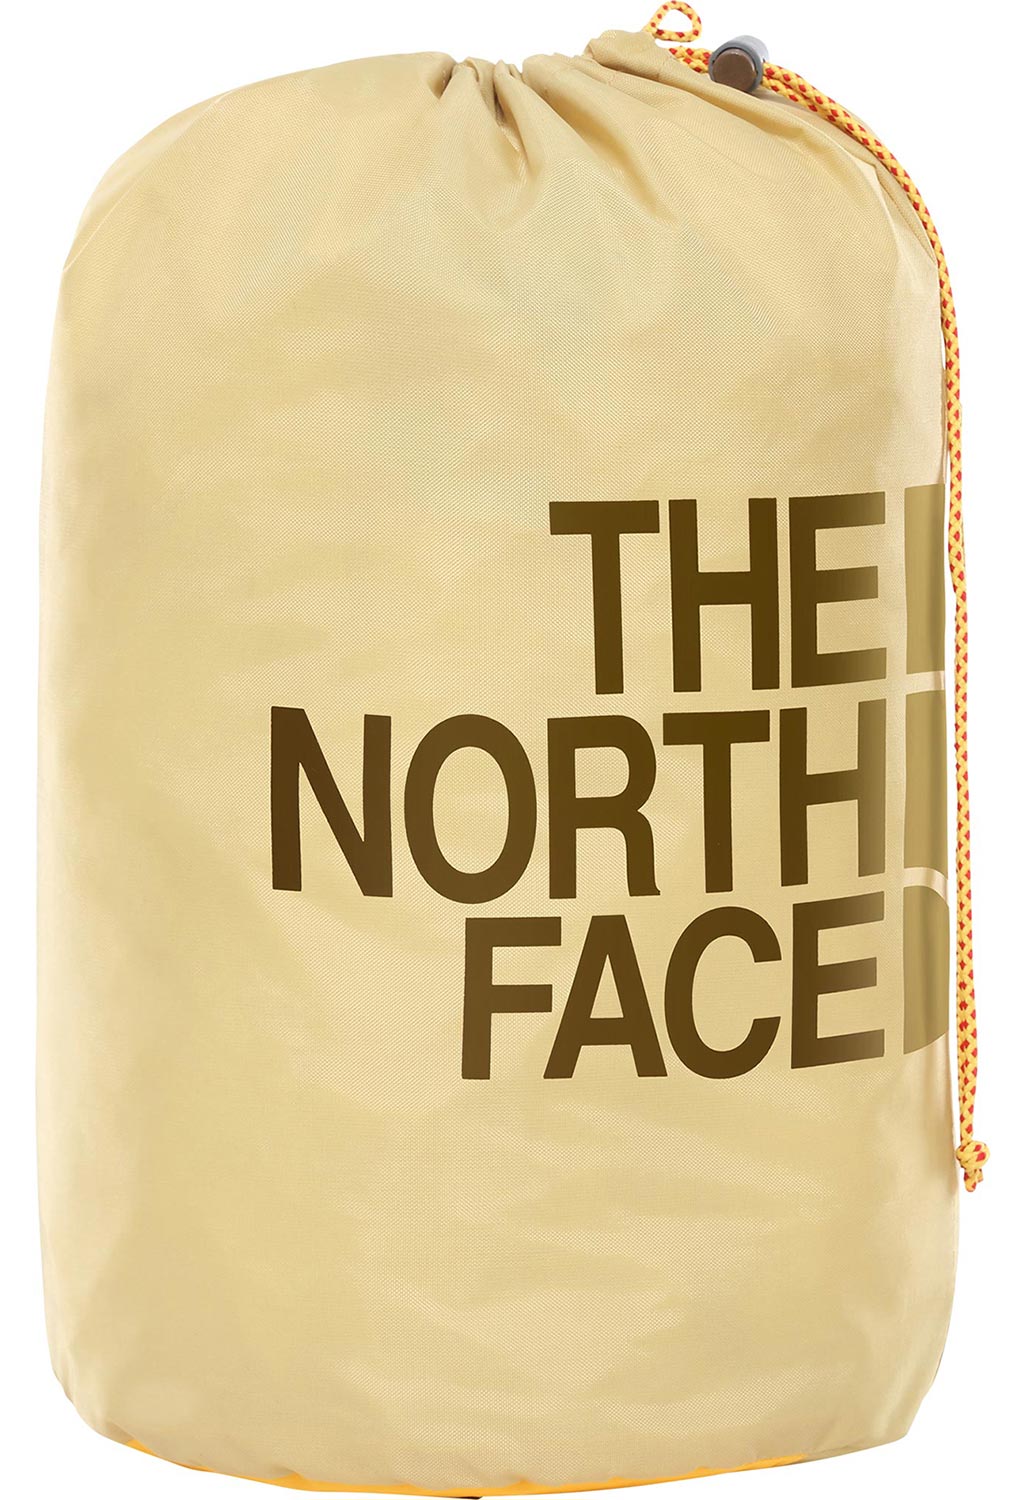 The North Face Eco Trail Synthetic 35 Sleeping Bag - TNF Yellow/Hemp